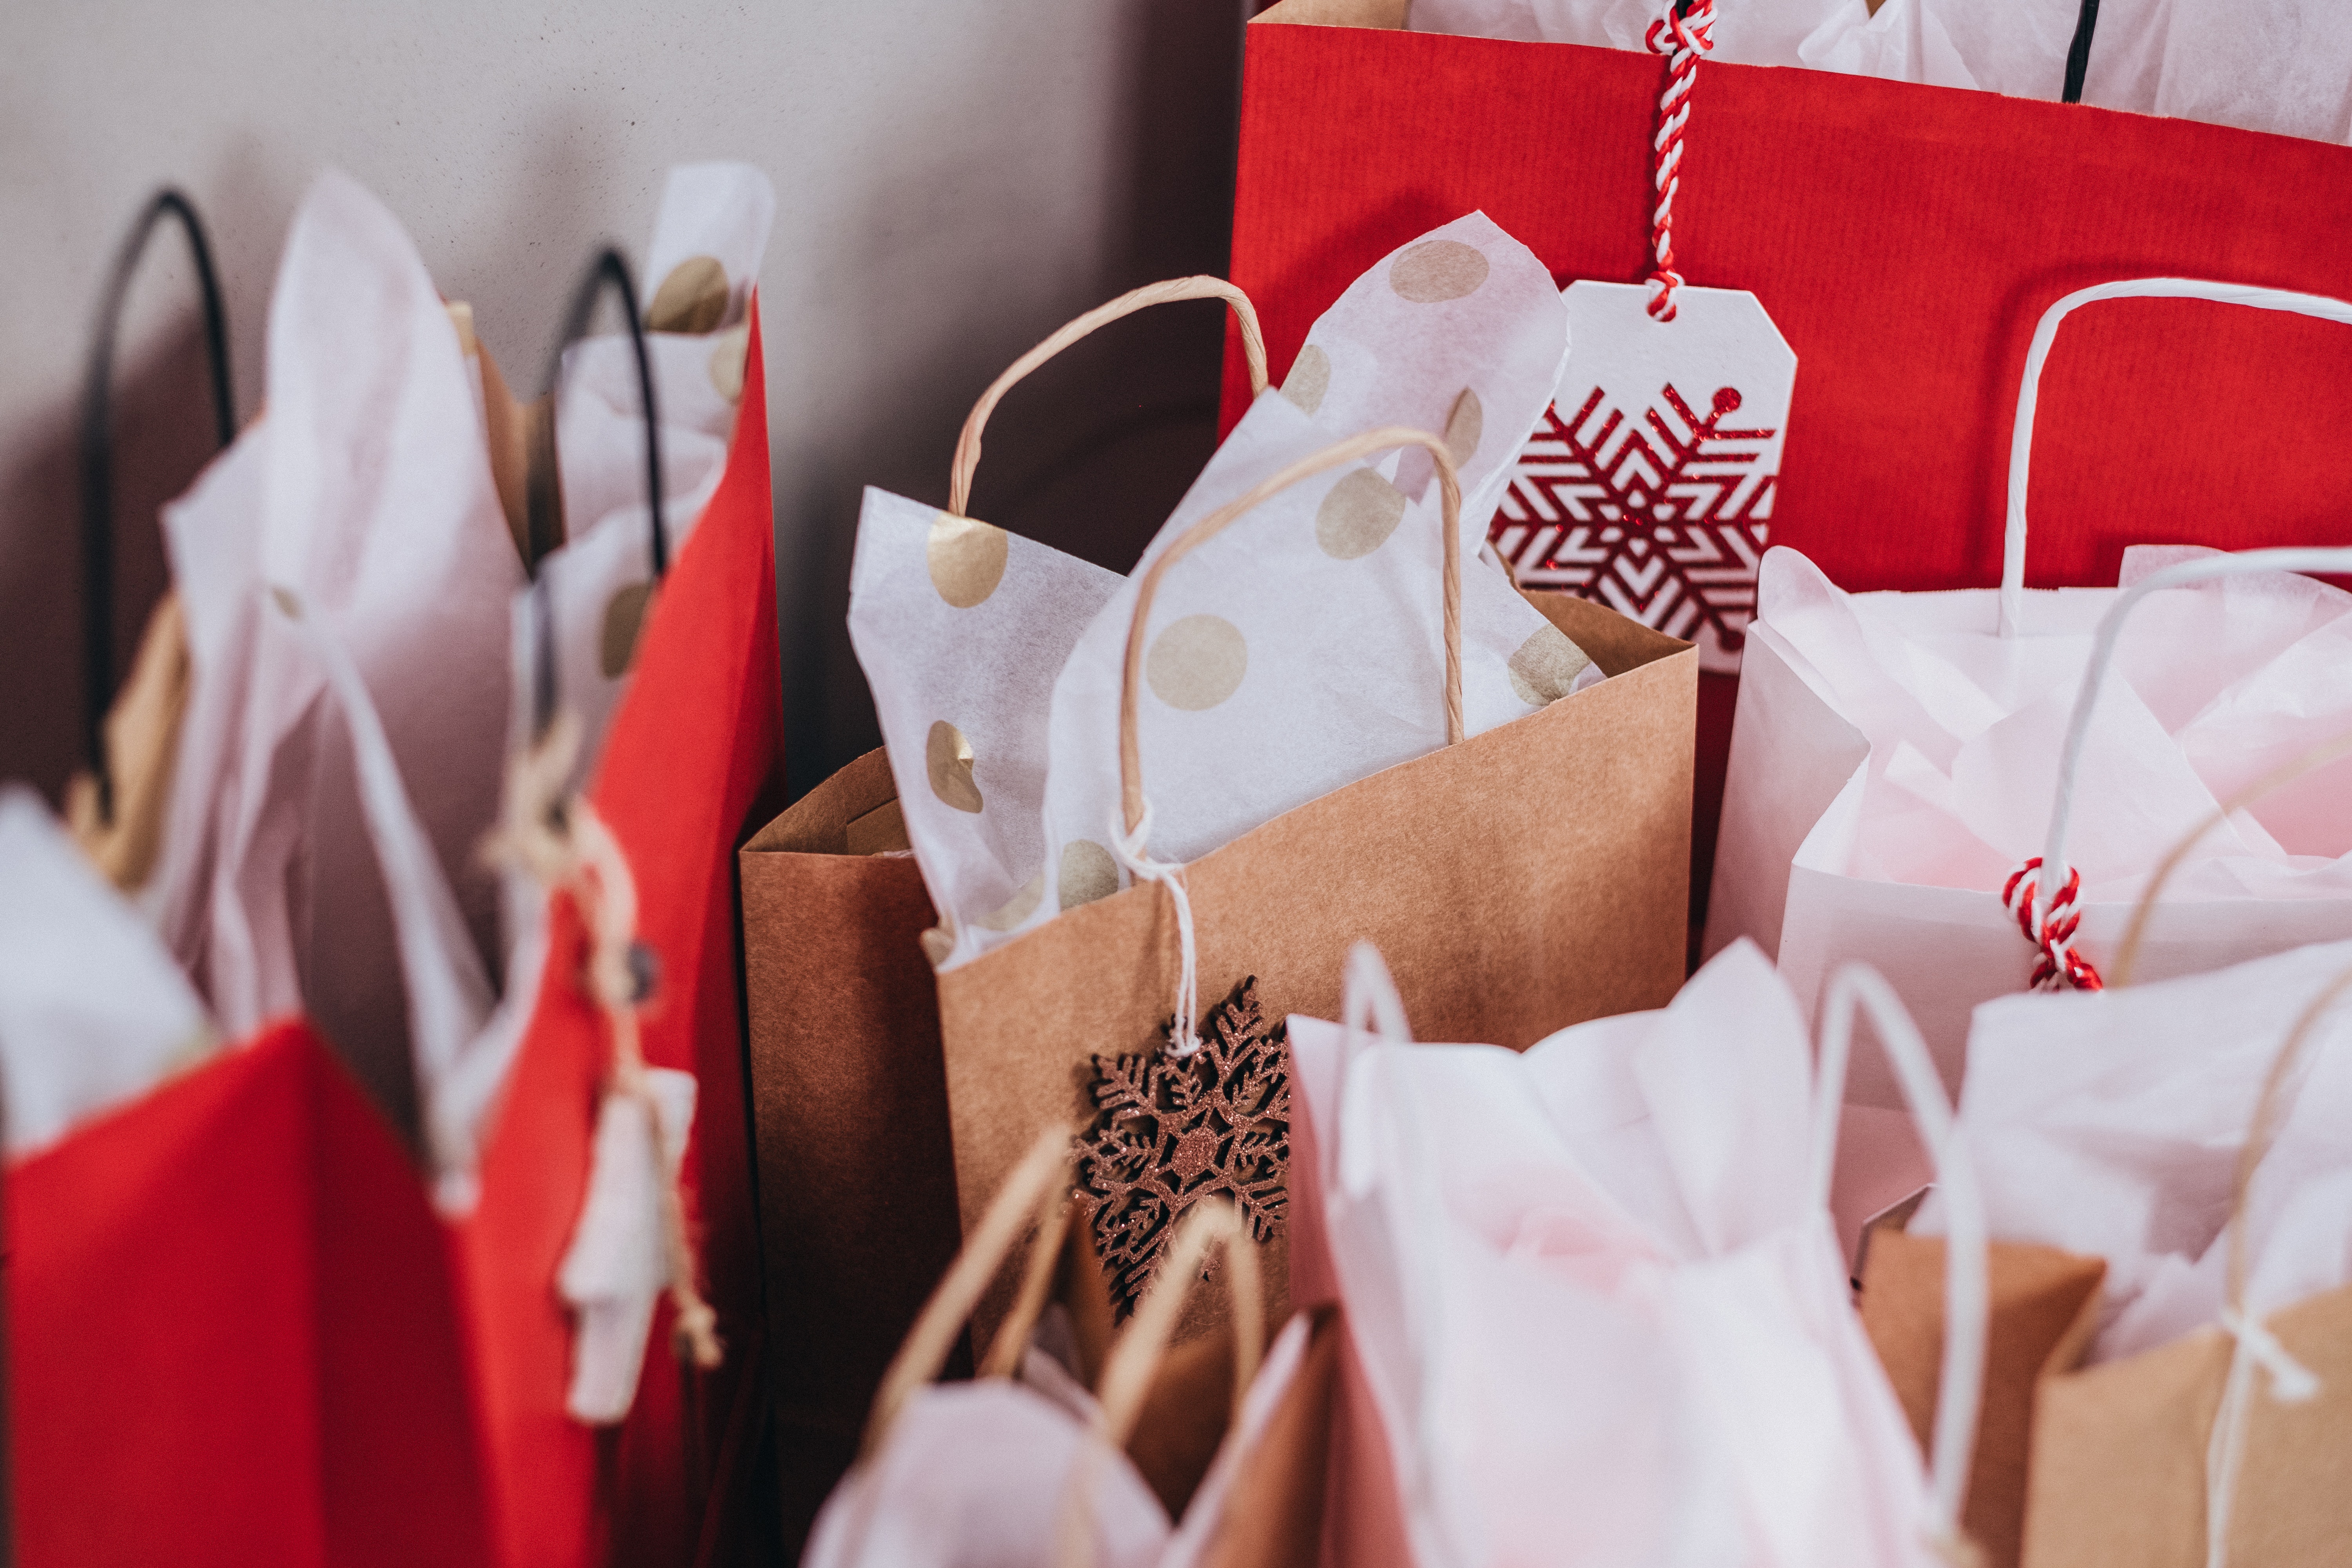 Assortment of Christmas gifts in red and tan gift bags